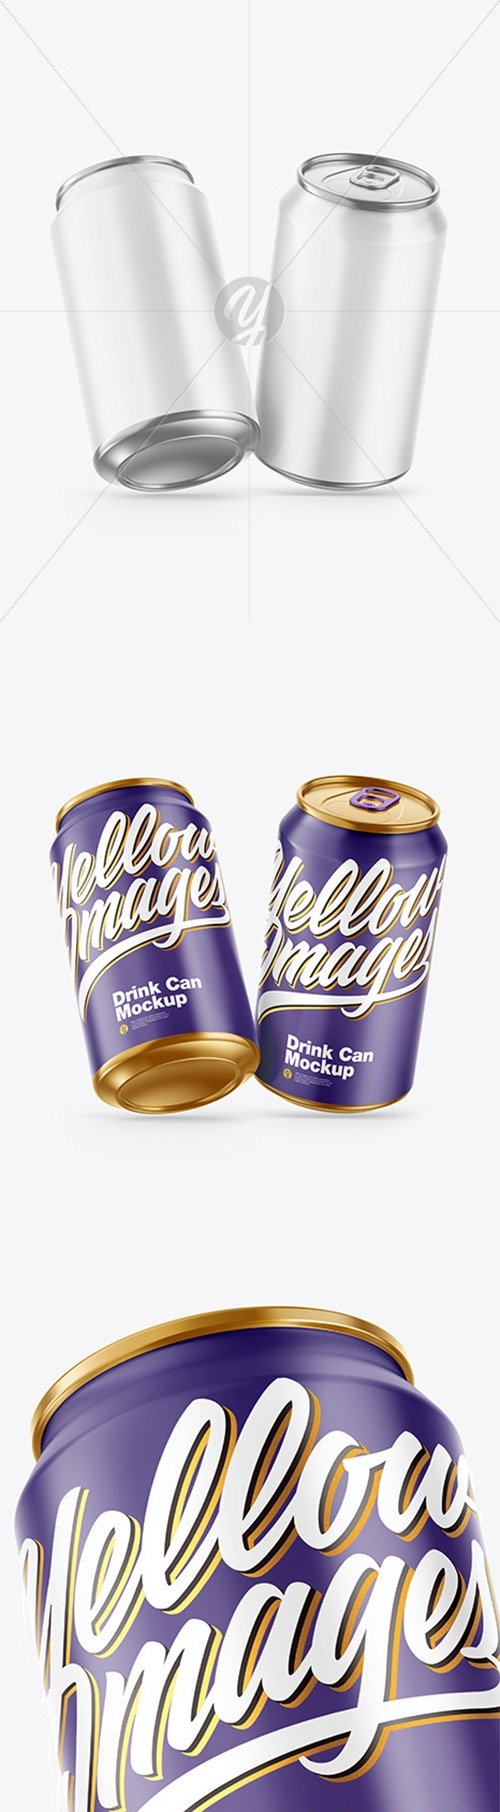 Two Metallic Drink Cans w/ Glossy Finish Mockup 68403